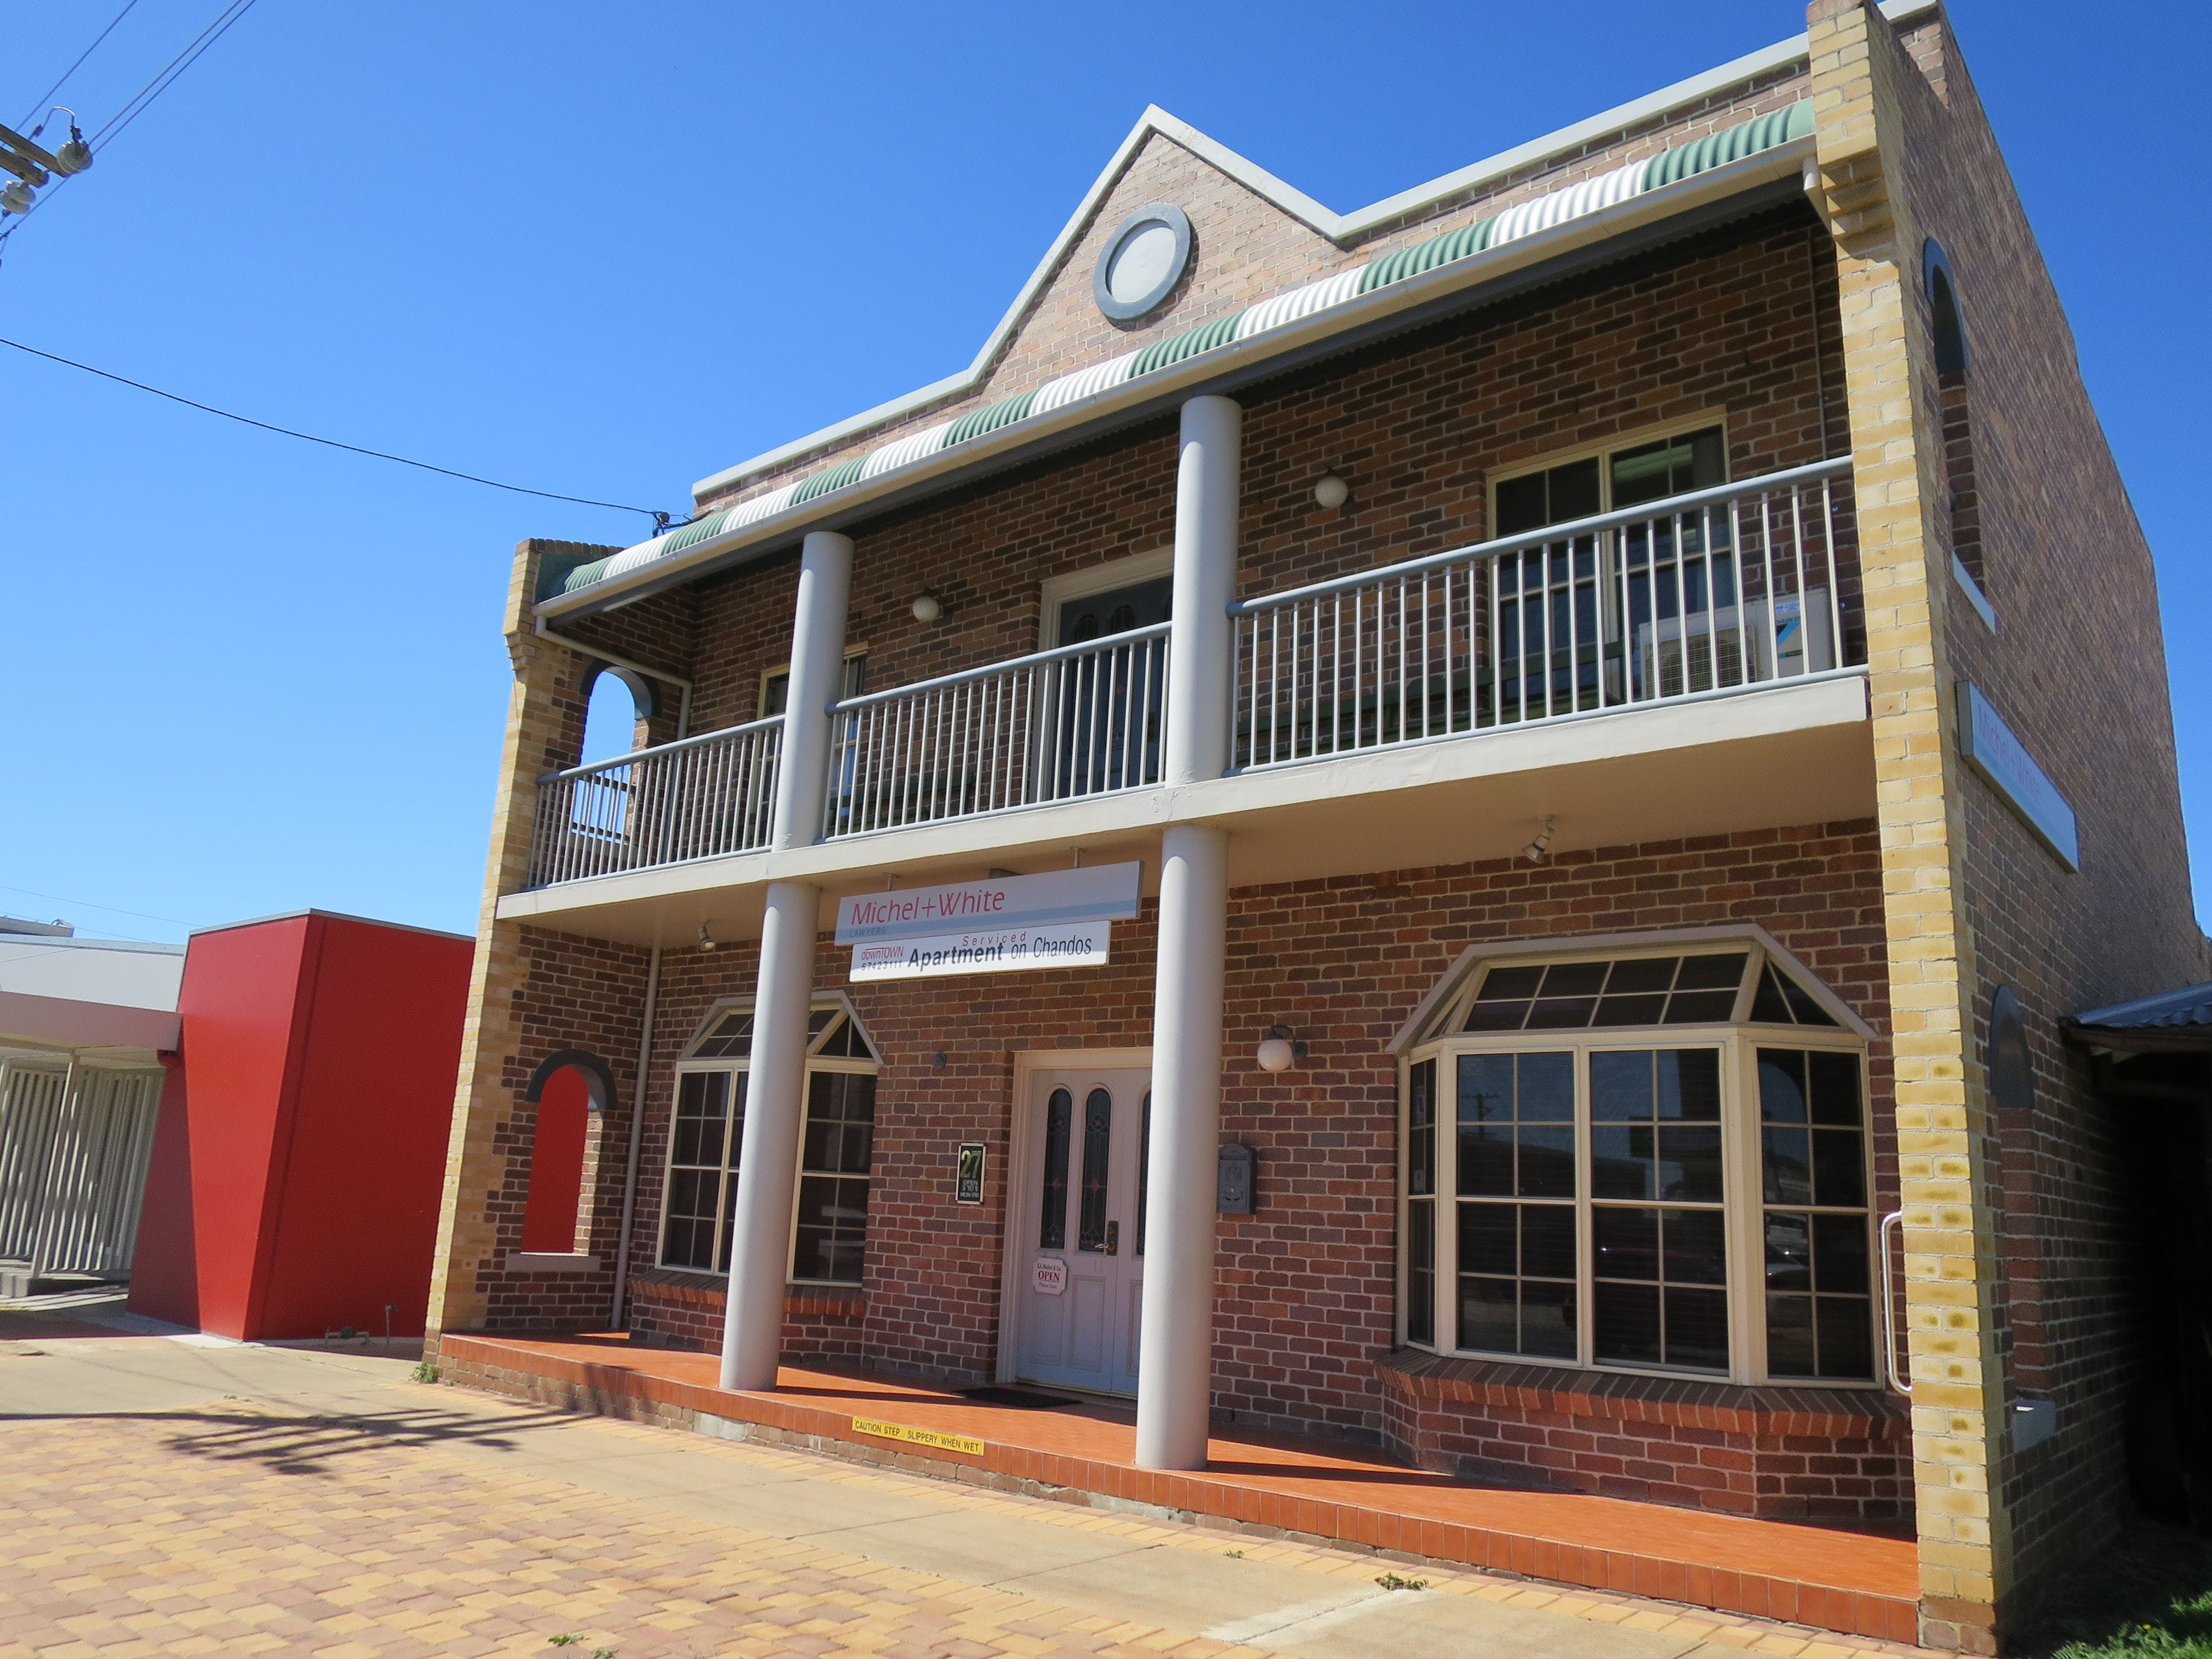 Downtown Apartment on Chandos - Townsville Tourism